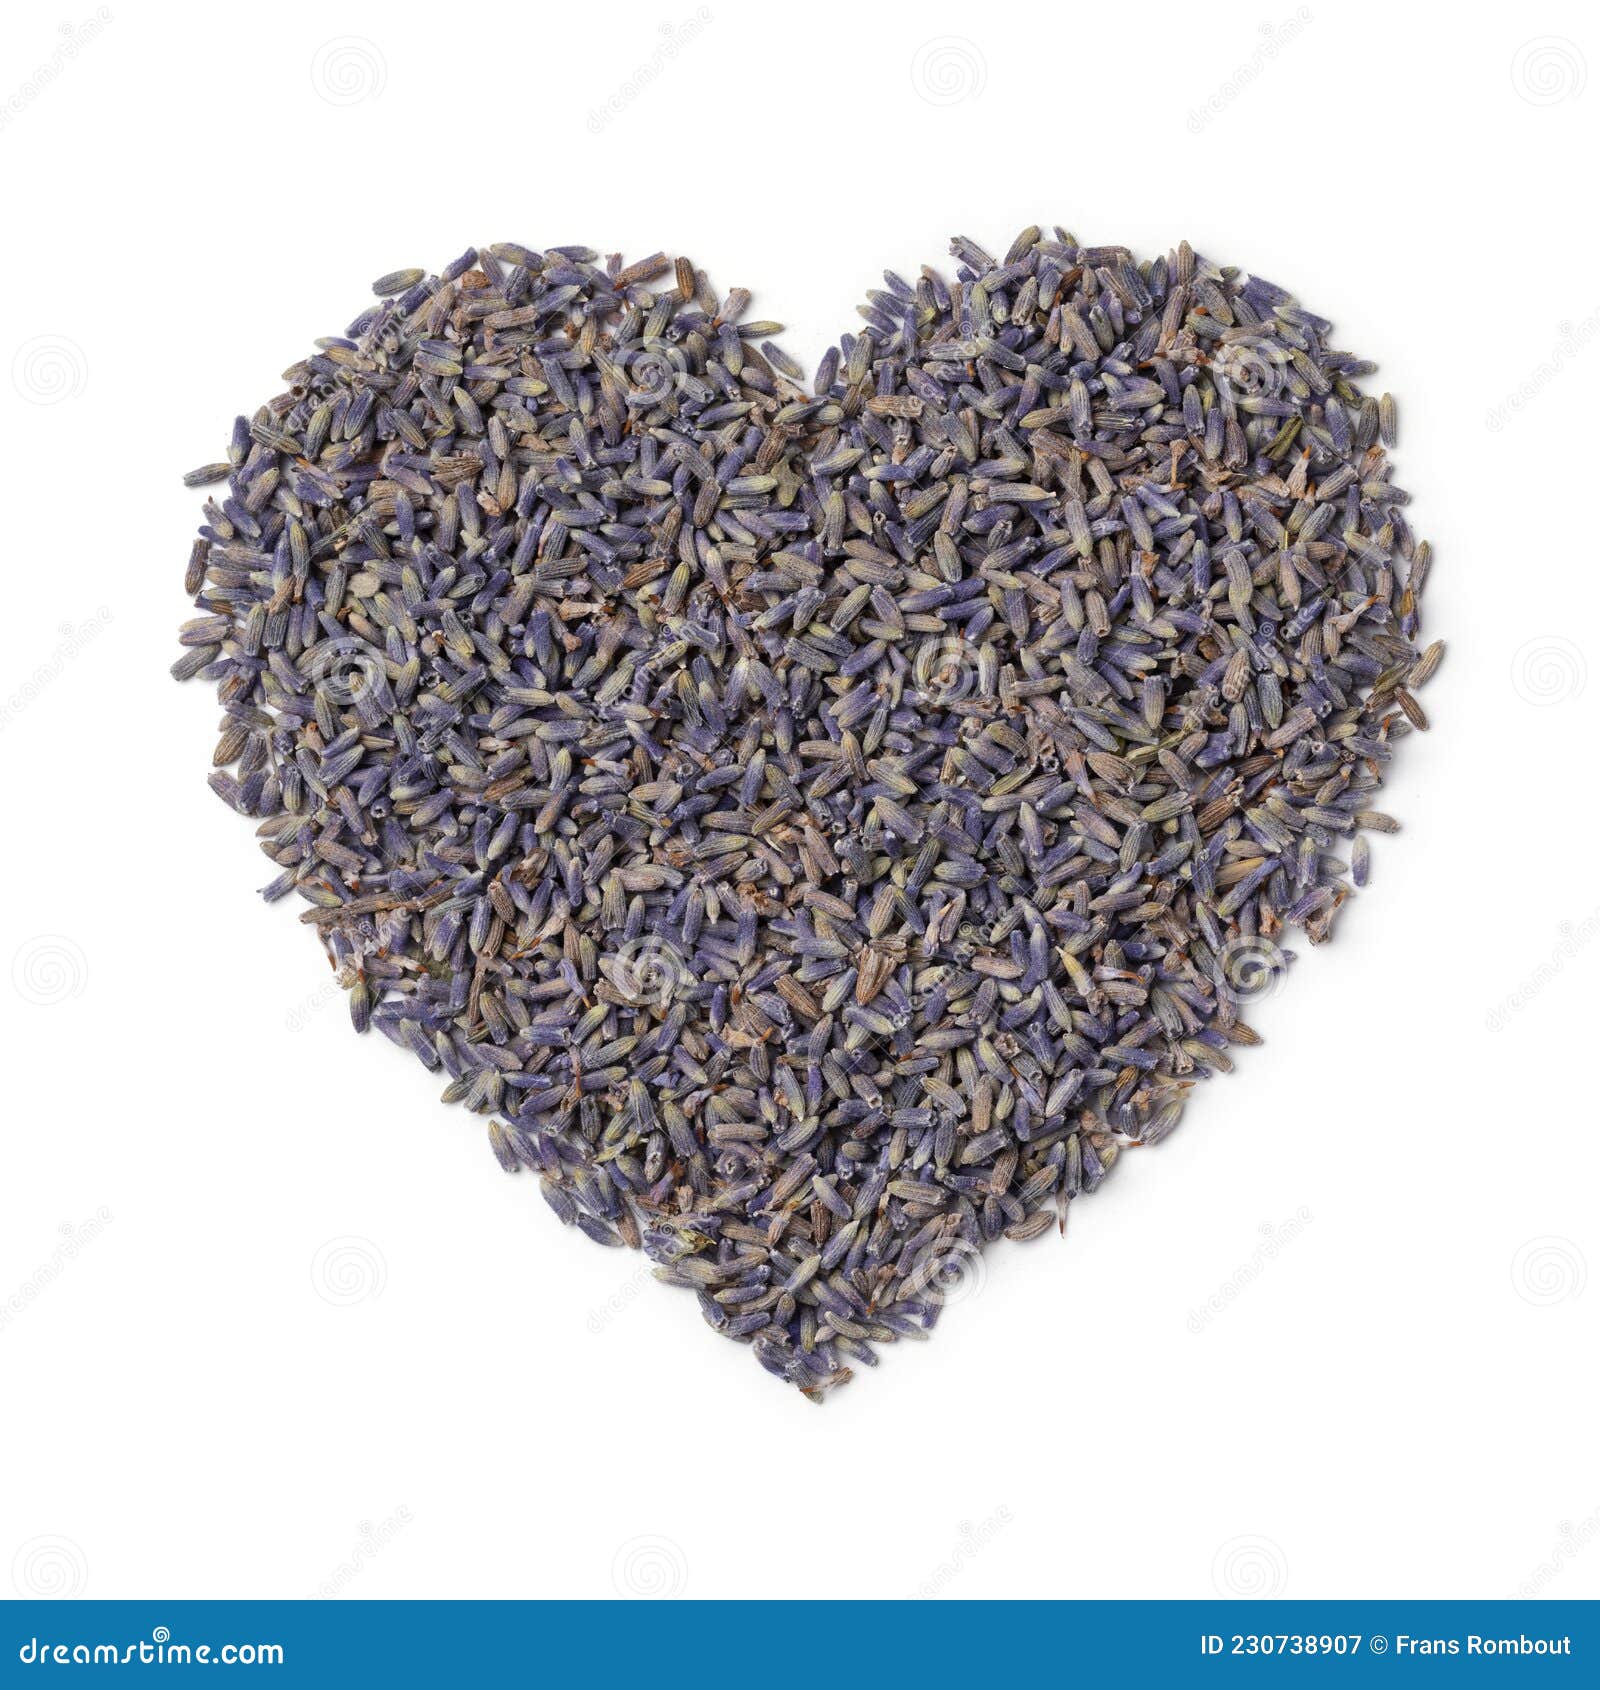 dried purple lavender flowers close up in heart on white background